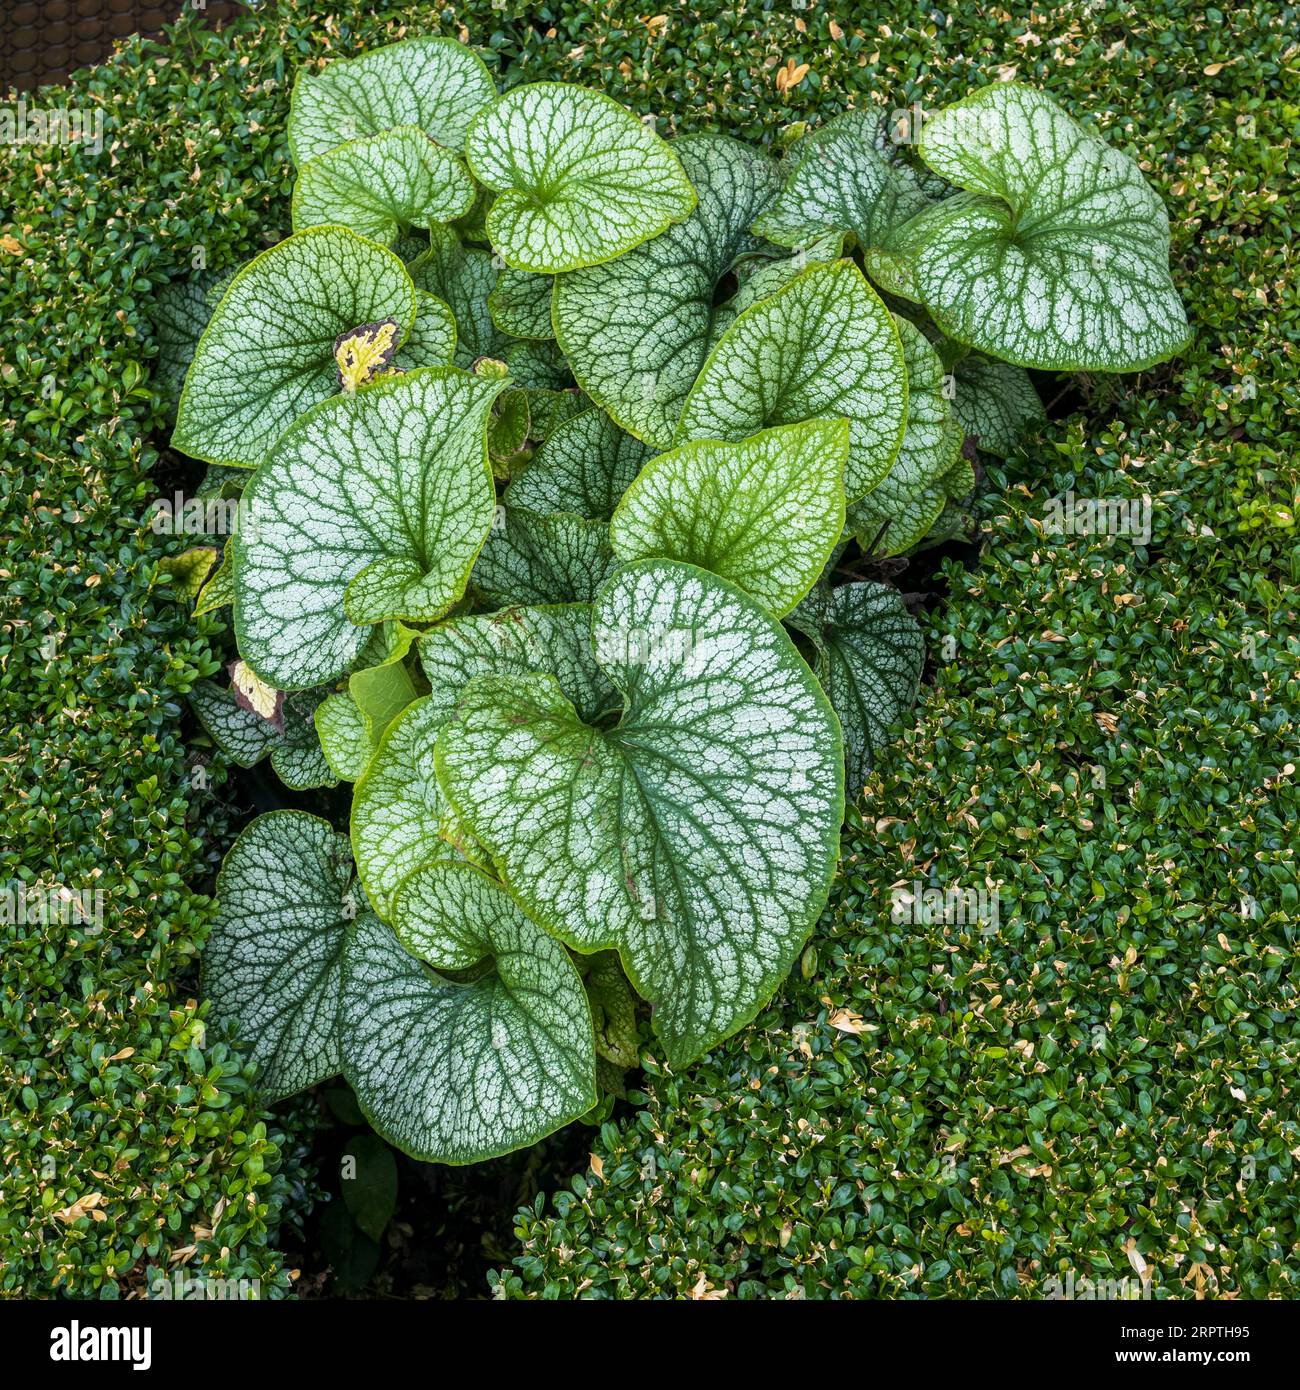 Heartleaf brunnera (binomial name: Brunnera macrophylla), also known as Siberian bugloss, in a spring garden against a boxwood background Stock Photo